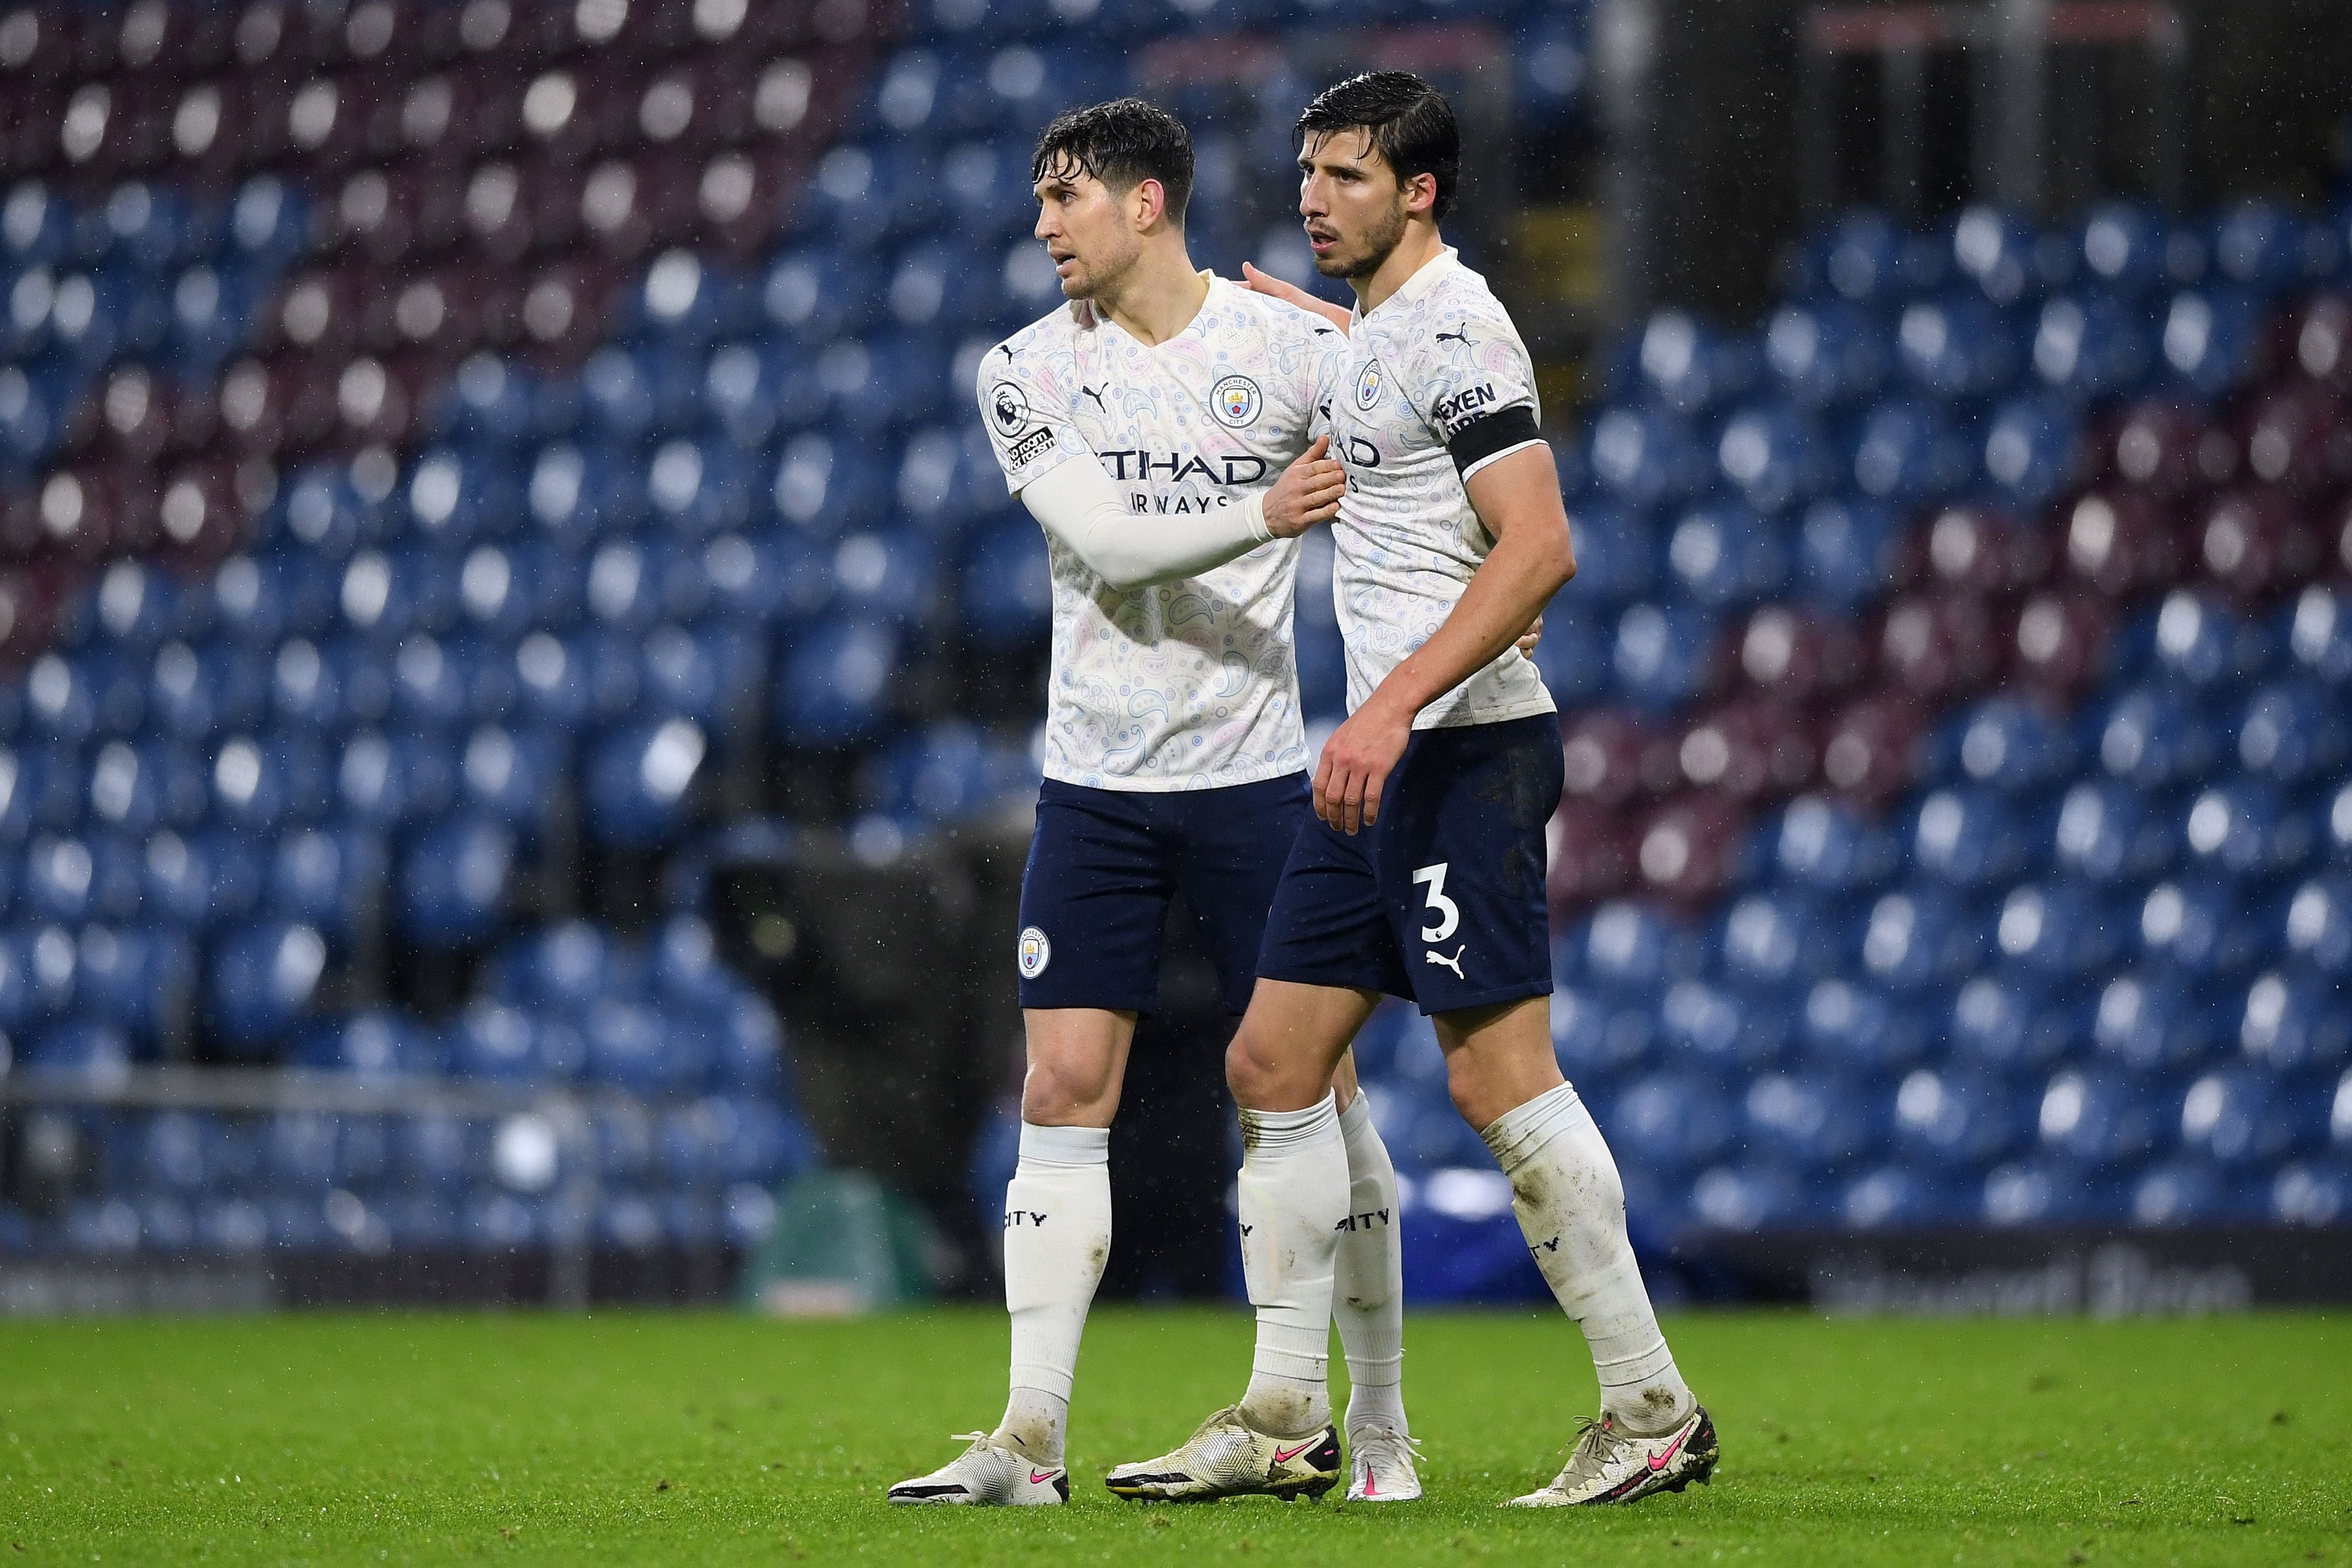 Ruben Dias (right) has been an inspired signing in central defence alongside a rejuvenated John Stones